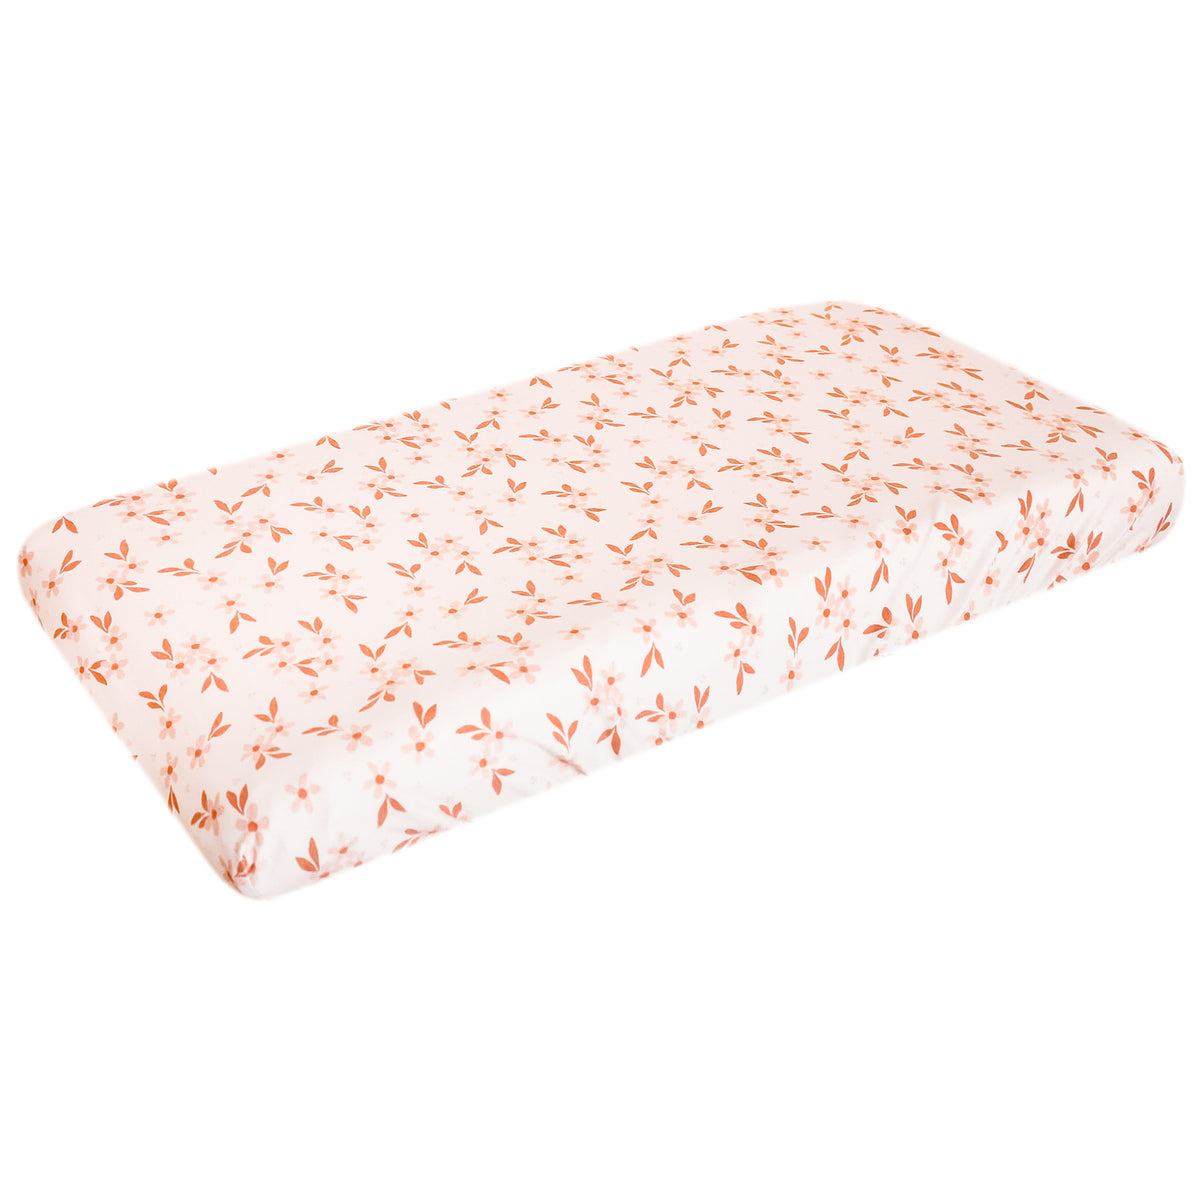 Premium Knit Diaper Changing Pad Cover - Rue